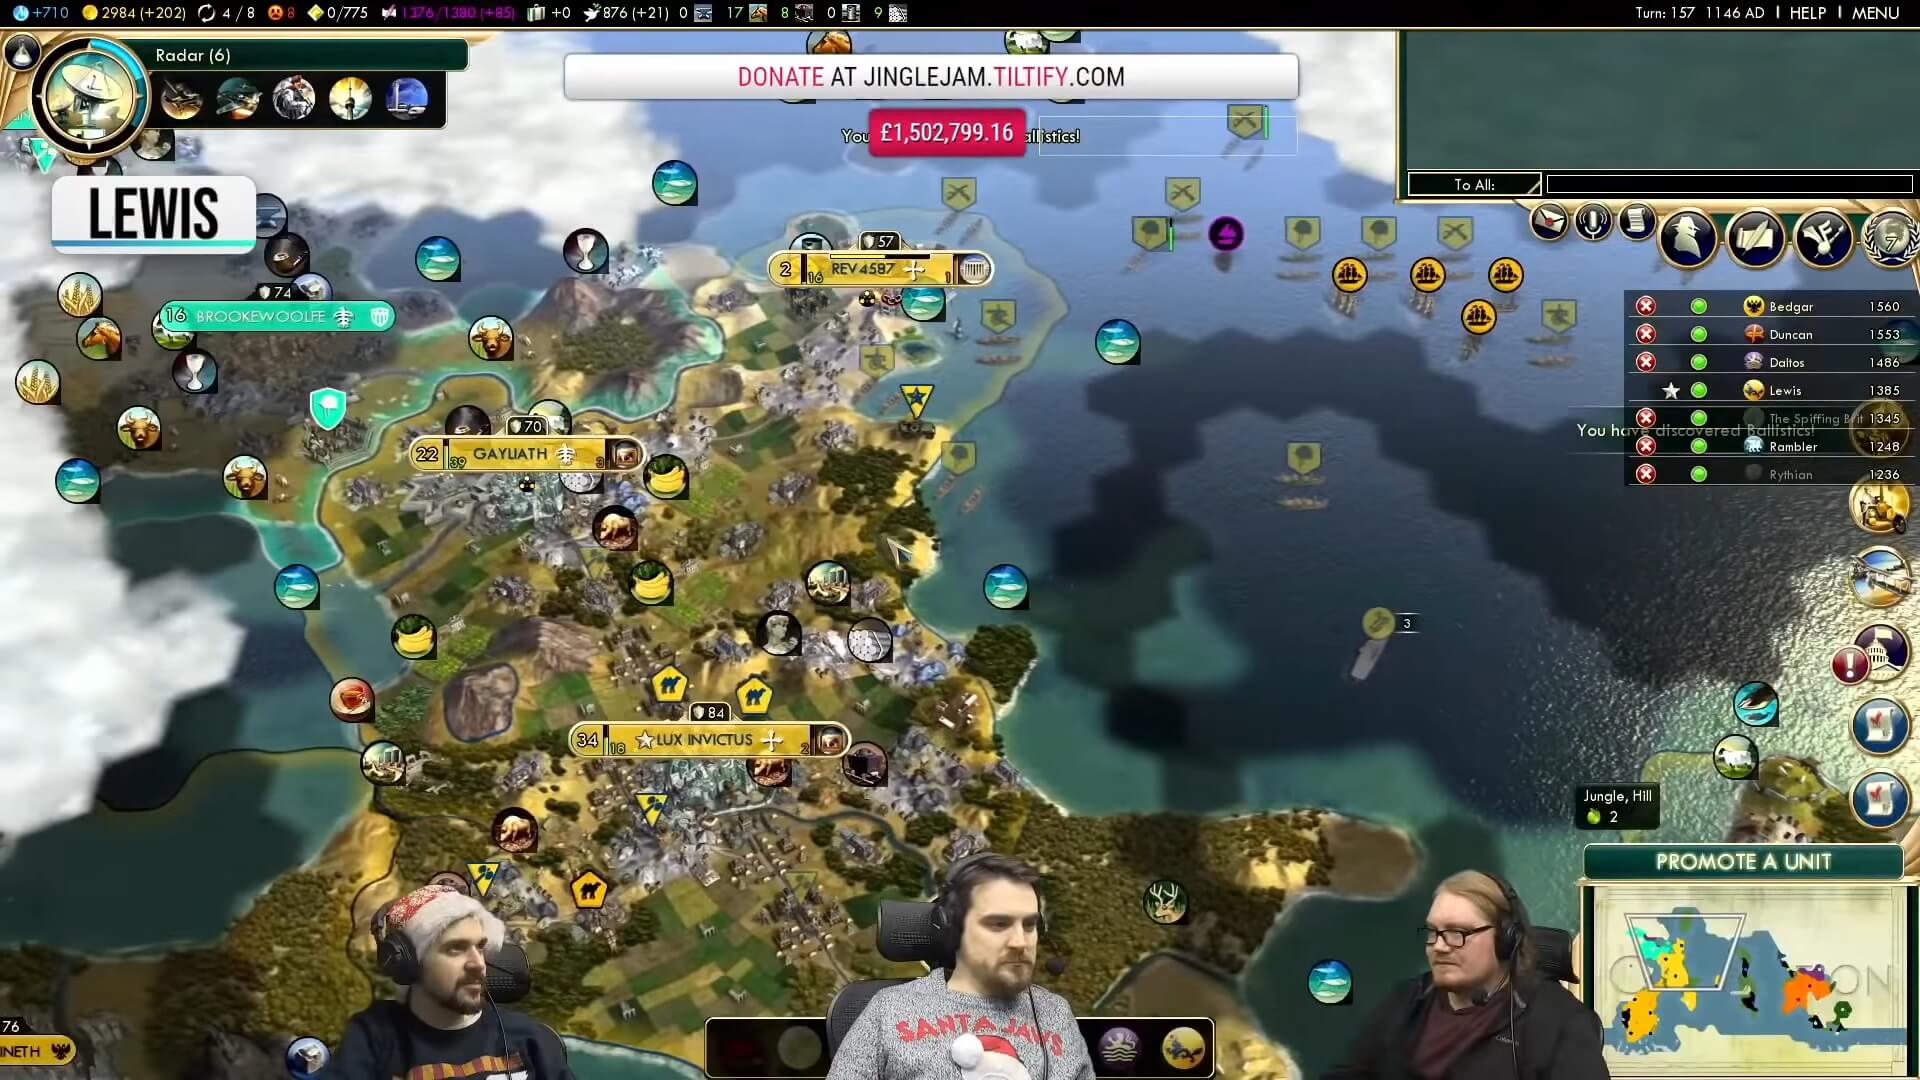 A game of Civilization 5 that took place during Jingle Jam 2020, which raised money for Safe In Our World